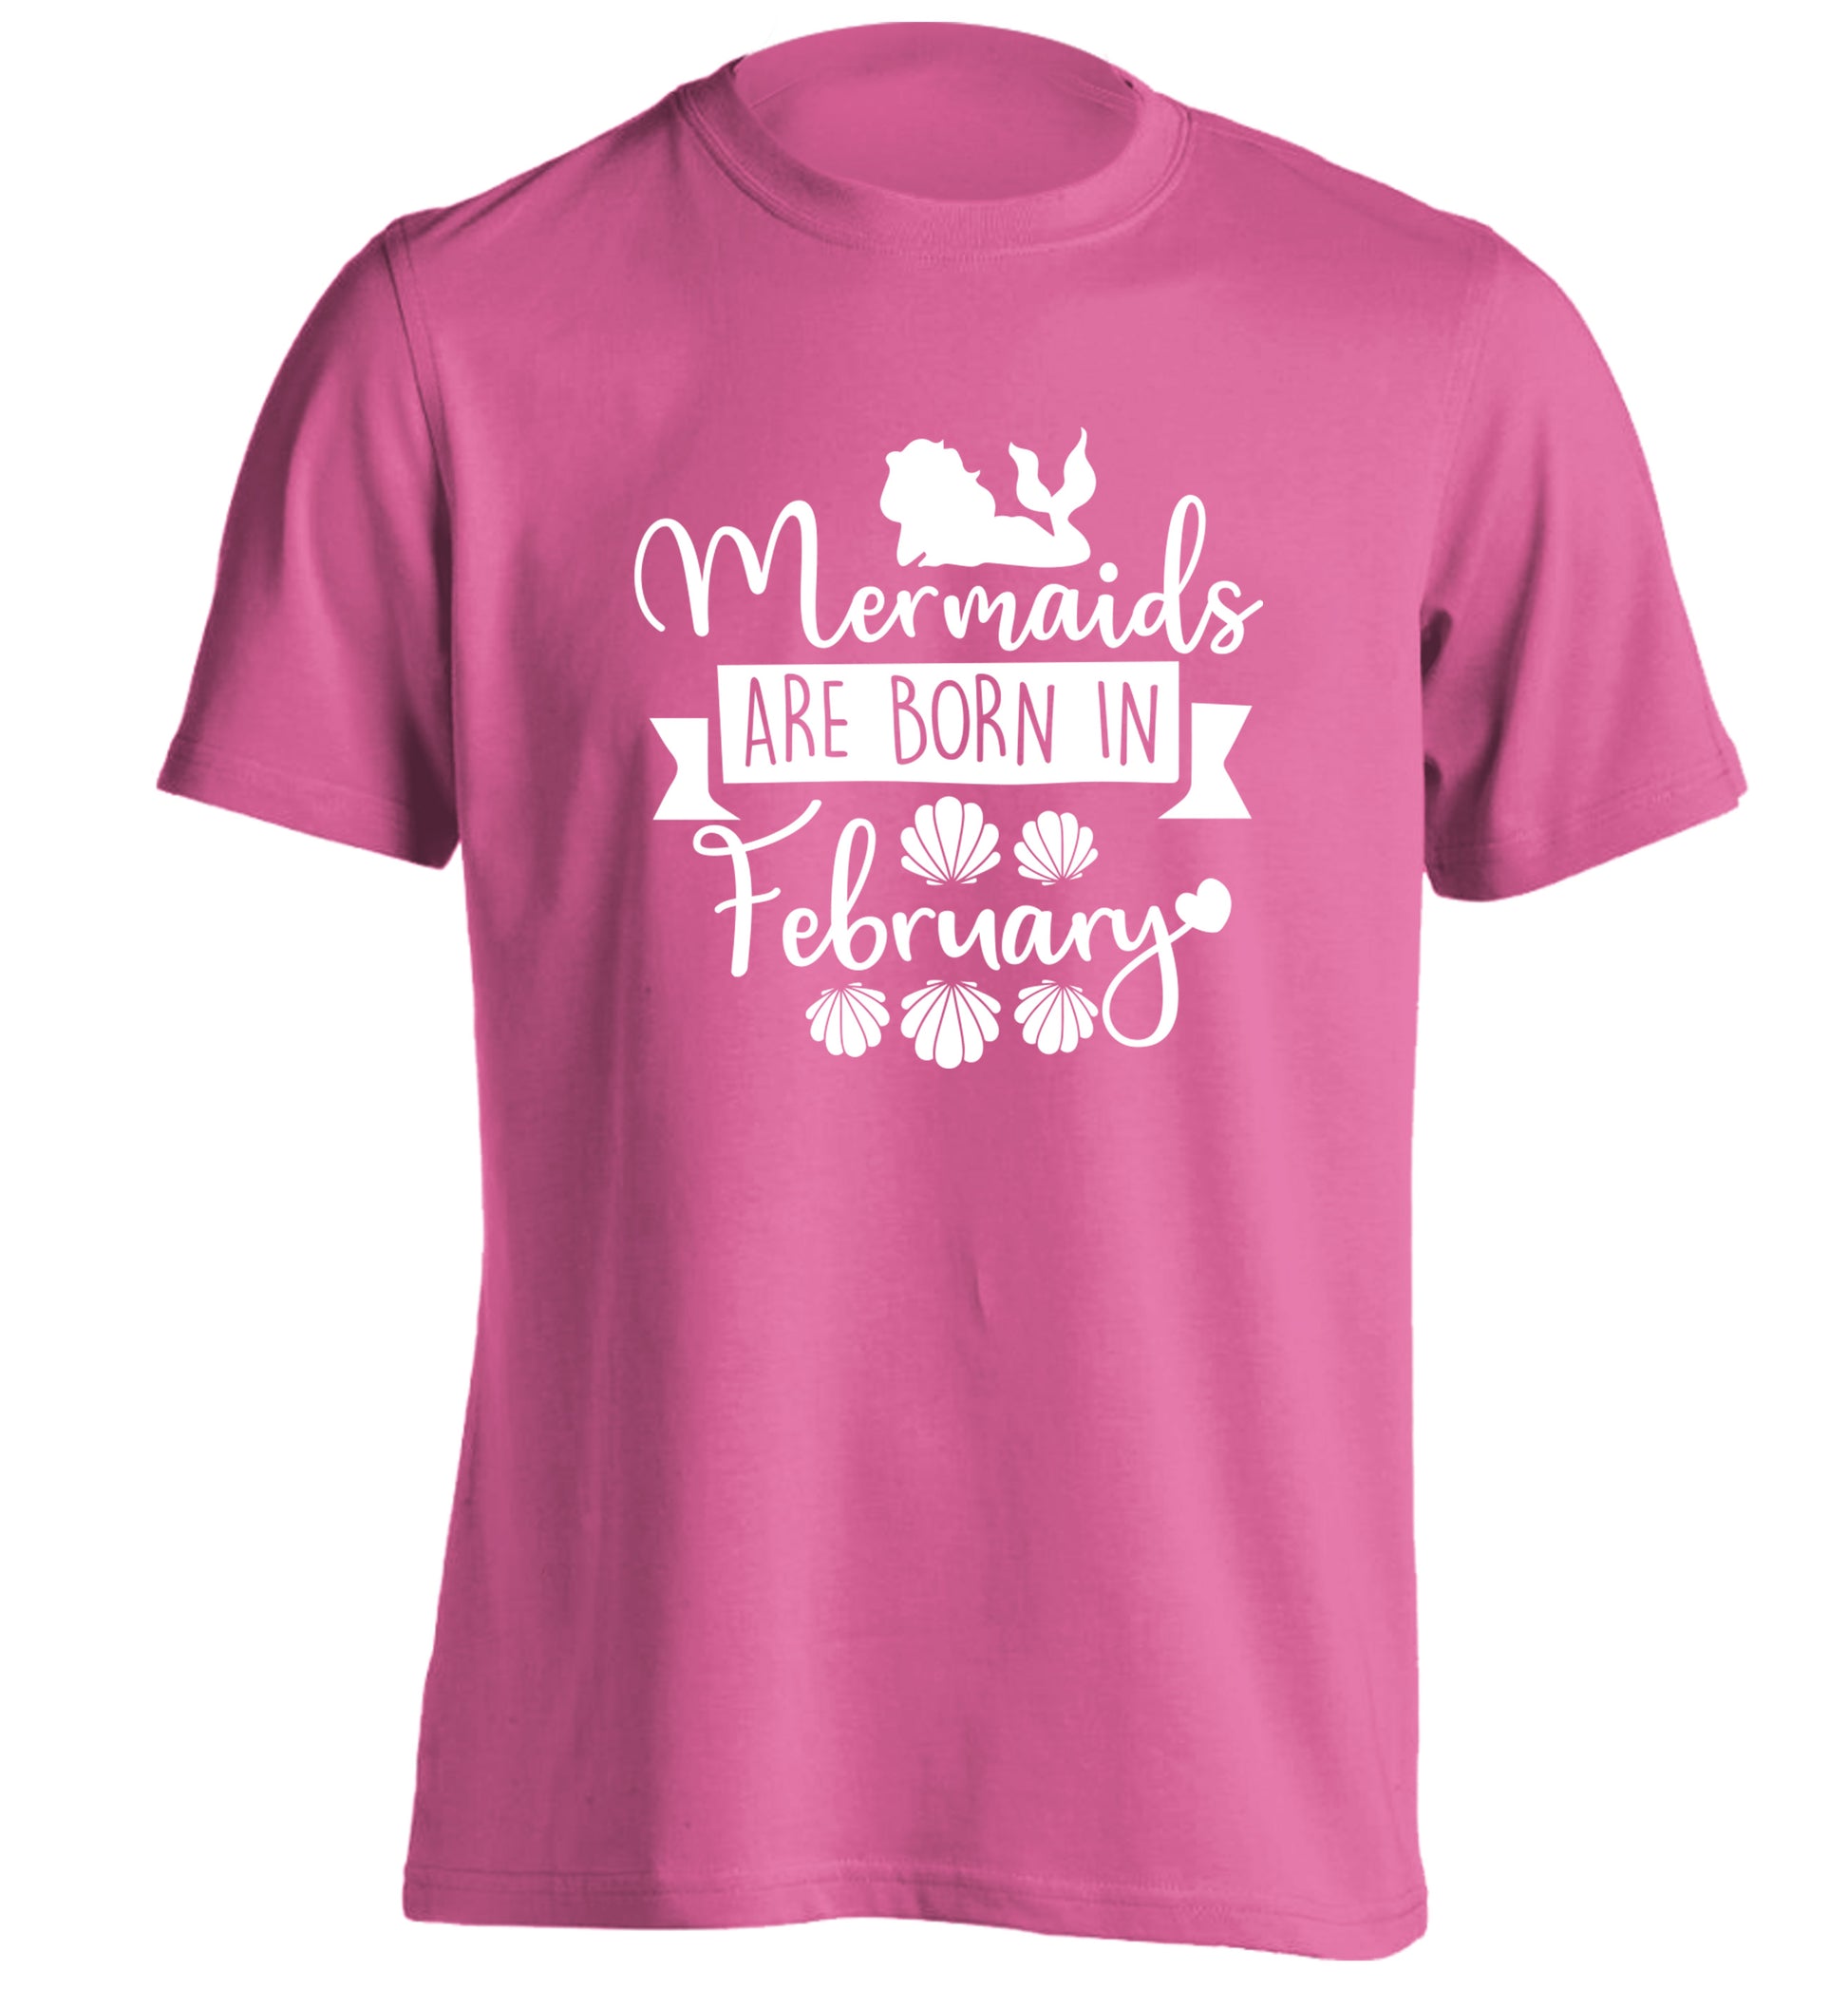 Mermaids are born in February adults unisex pink Tshirt 2XL